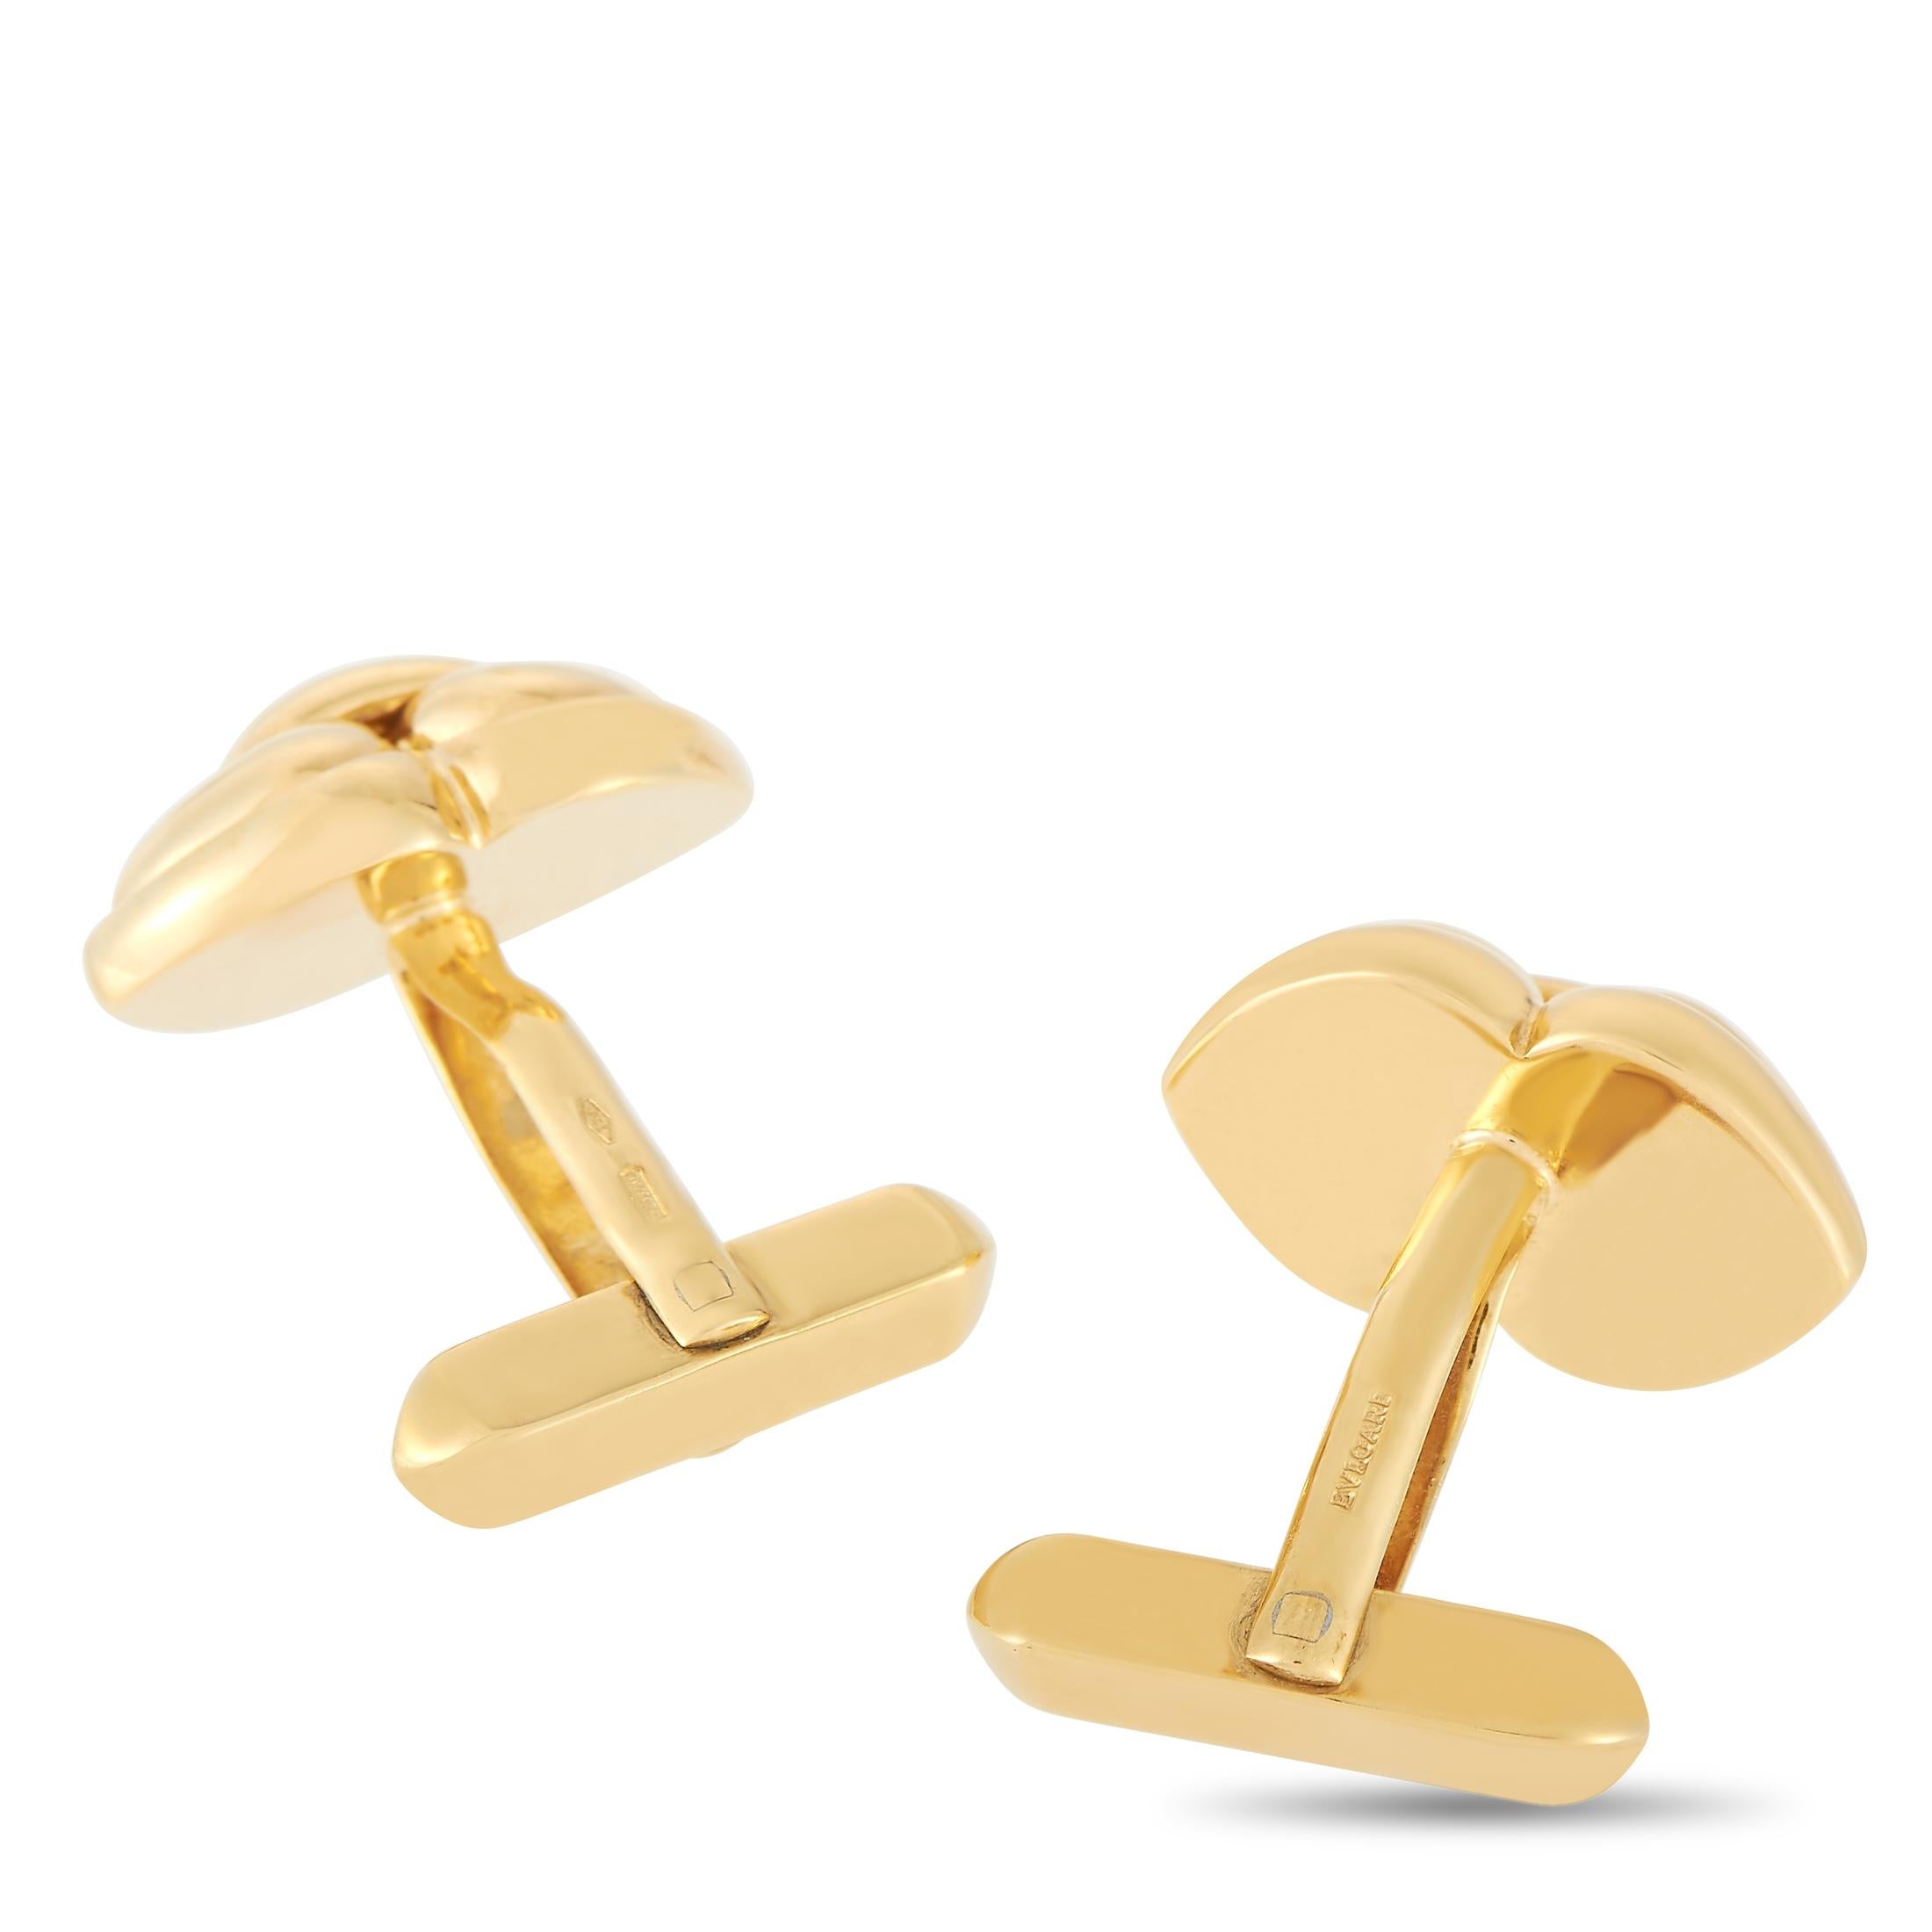 Crafted from 18K Yellow Gold, these Bvlgari cufflinks exude the luxury brand’s commitment to classic design. The iconic shape is sleek, dignified, and extraordinarily elegant. Measuring 0.5” by 0.75”, these will add a subtle touch of refinement to